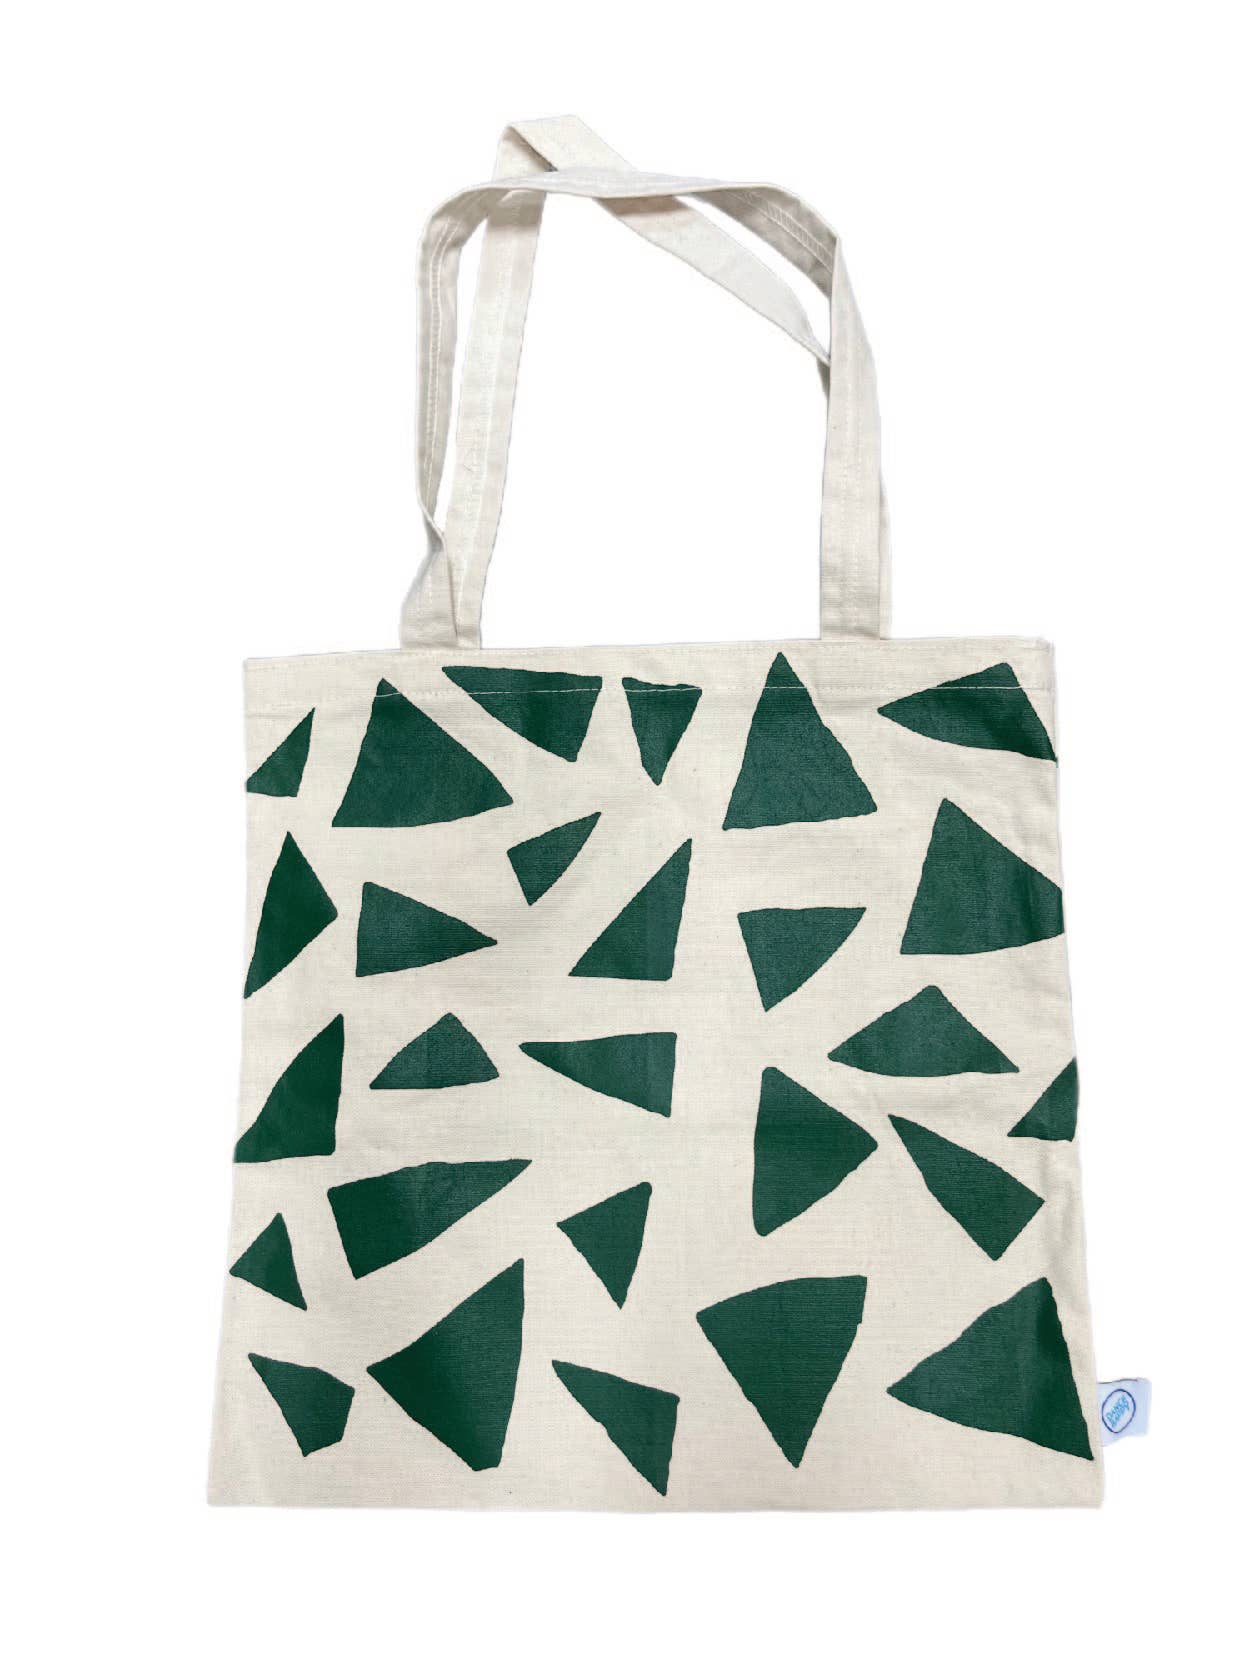 Fair Trade flat tote (Large Triangles)